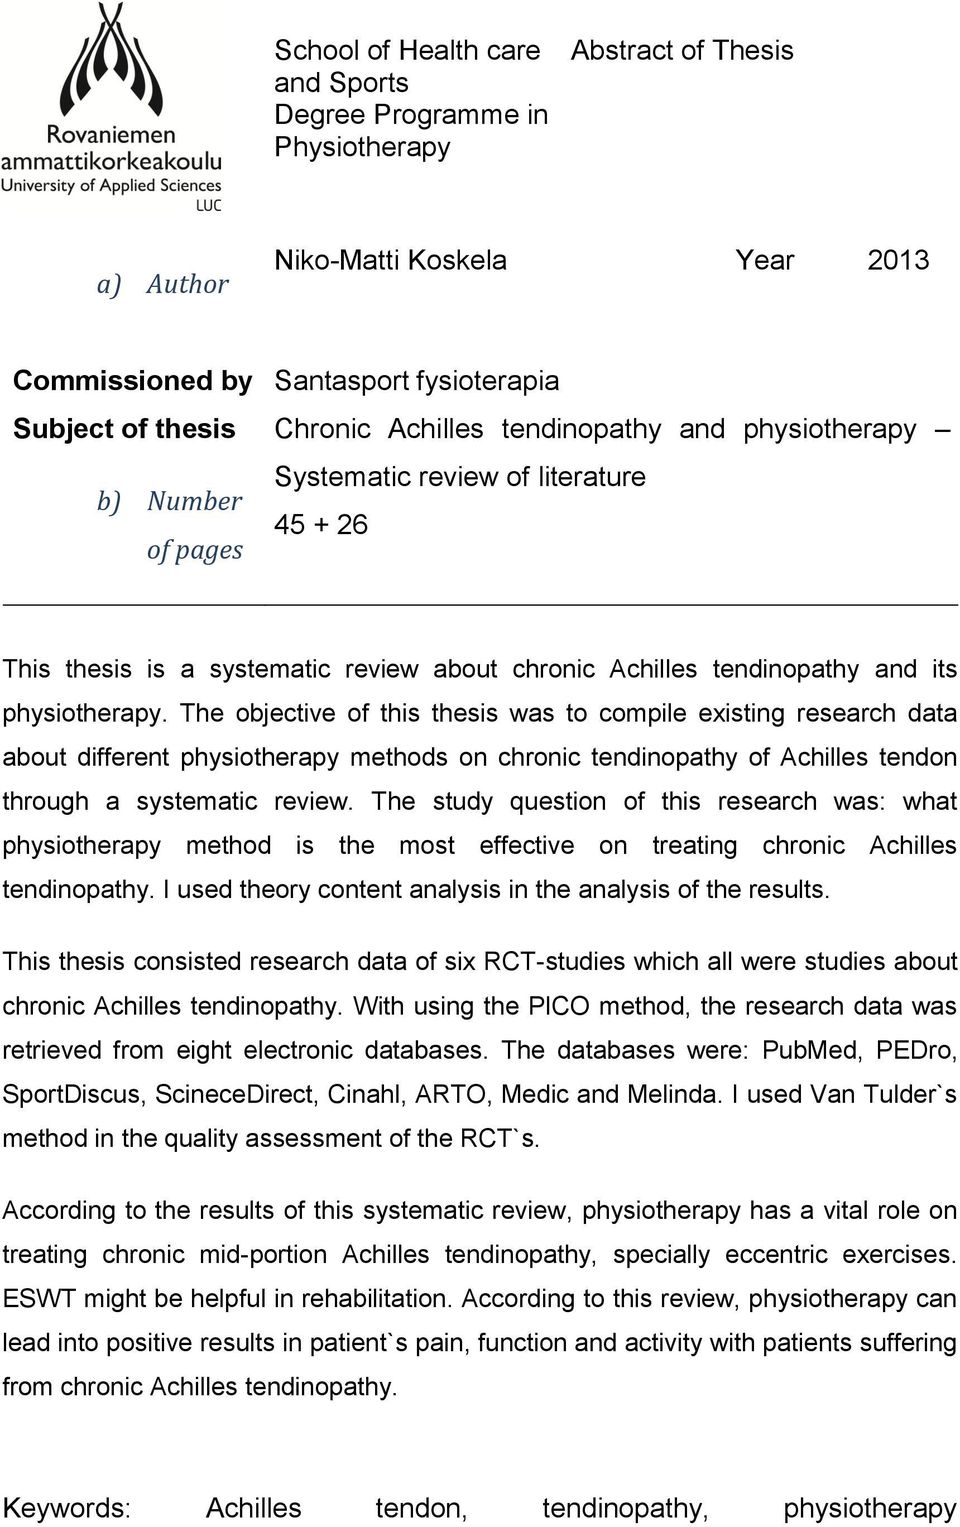 The objective of this thesis was to compile existing research data about different physiotherapy methods on chronic tendinopathy of Achilles tendon through a systematic review.